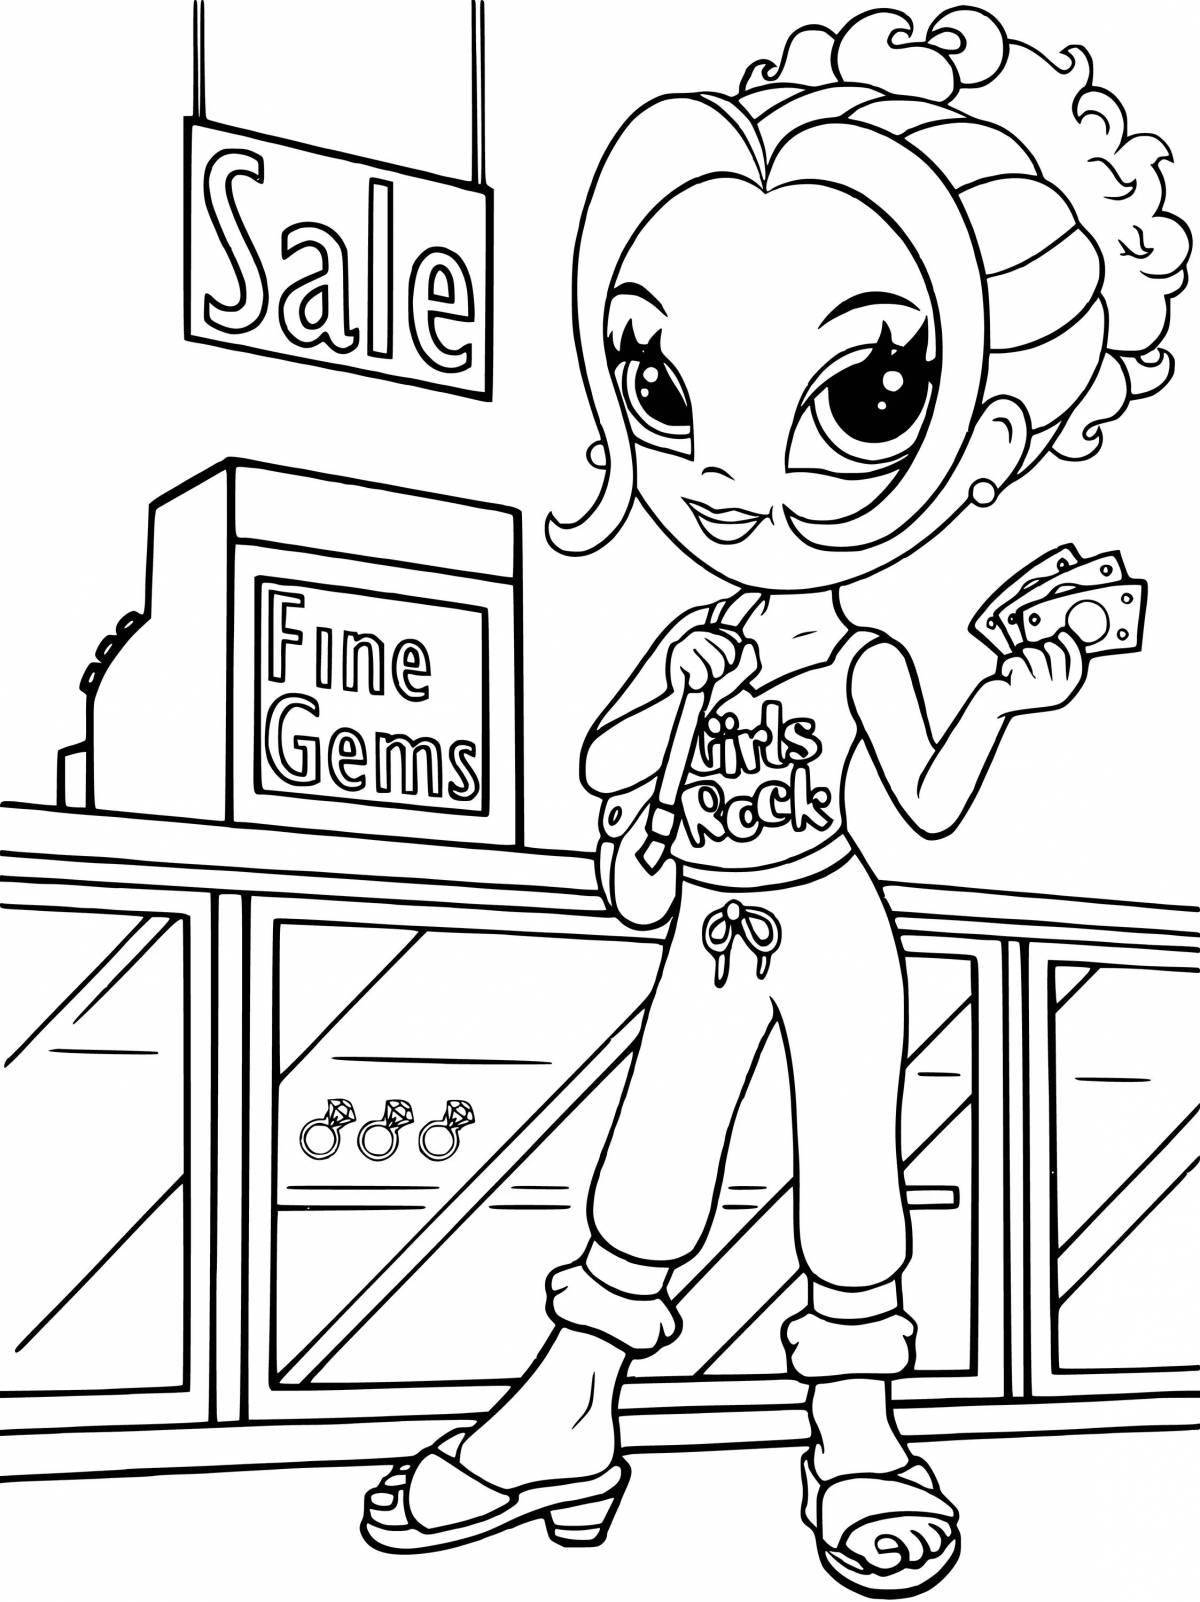 Lisa's playful coloring page